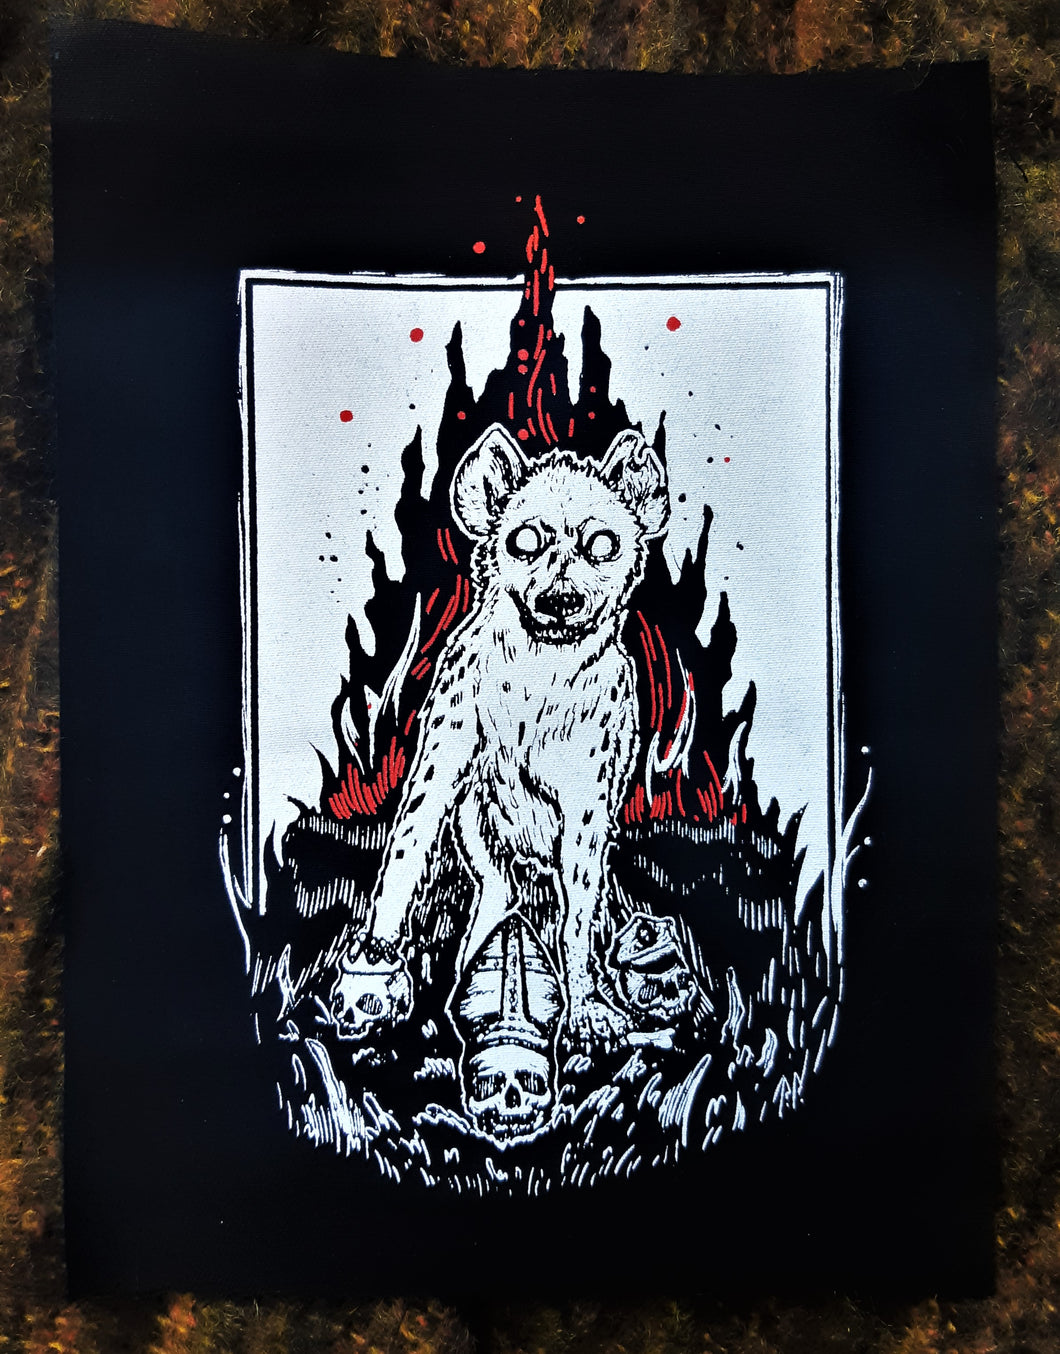 Hyena Backpatch - Pope, King and Cop skulls with flames - White and red ink - Screen printing on black fabric